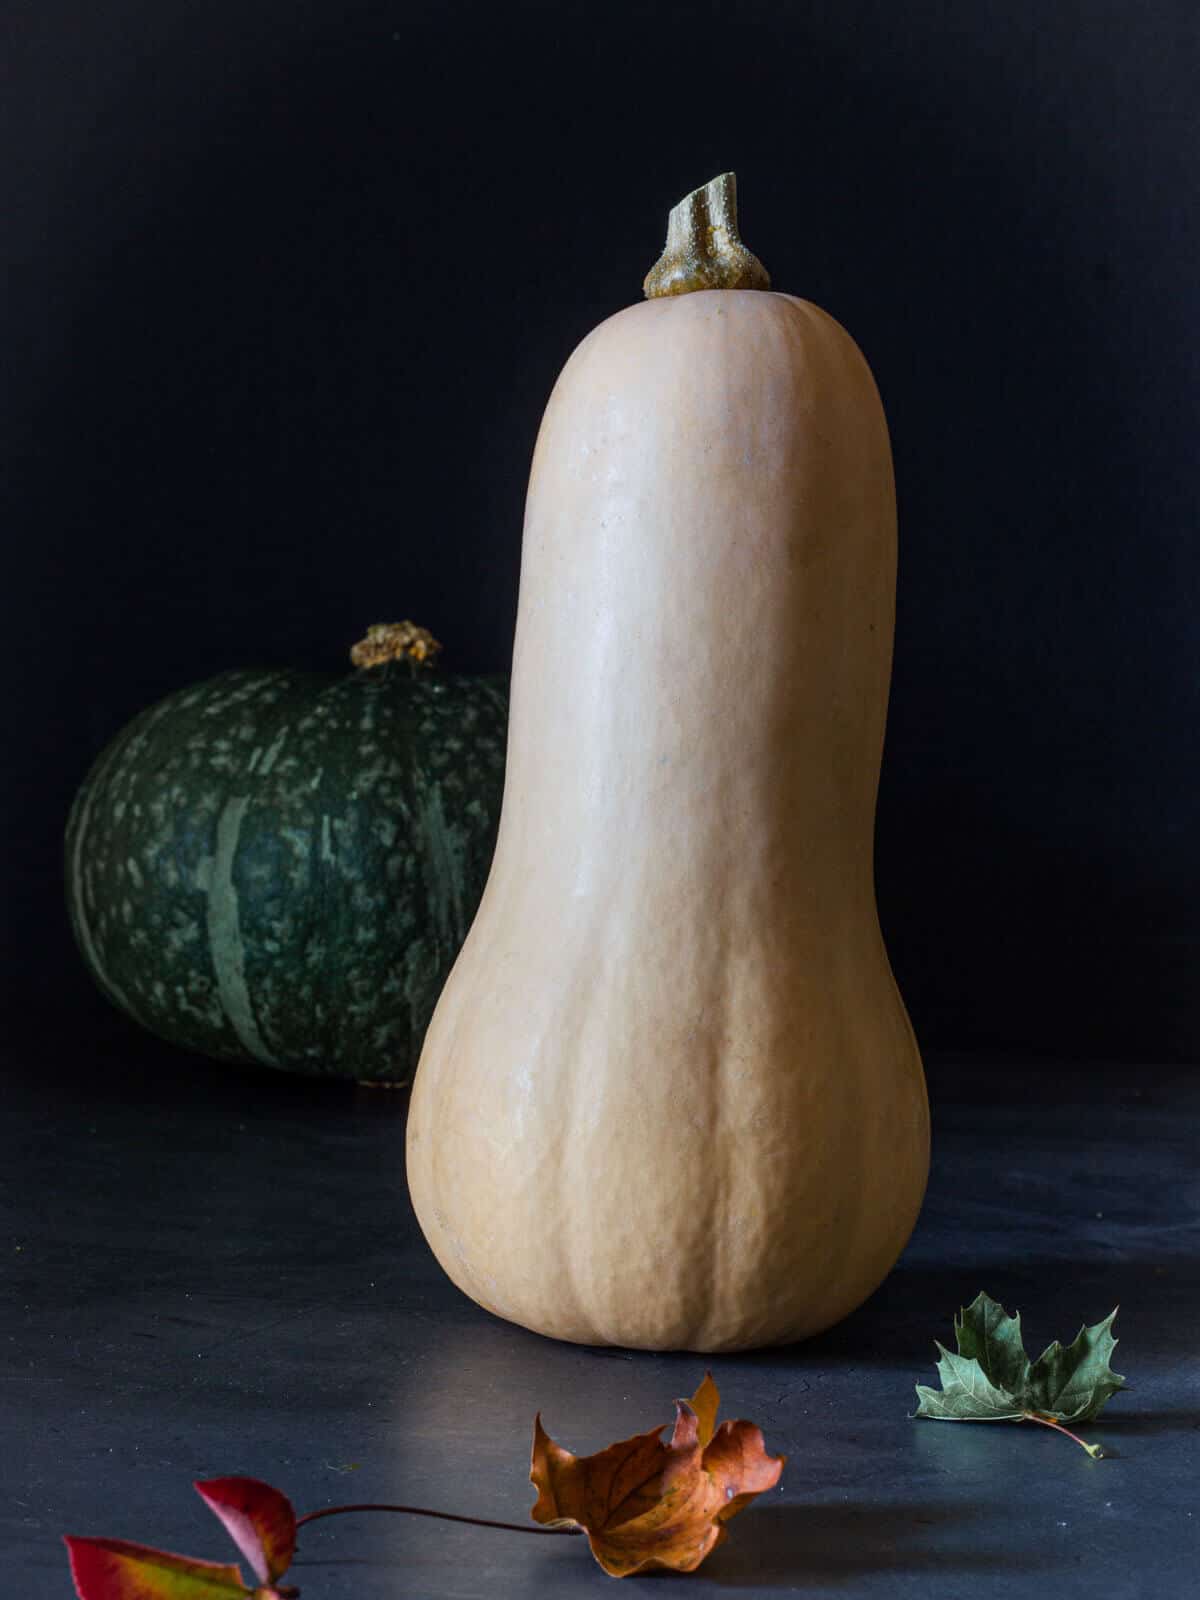 butternut squash standing on table.